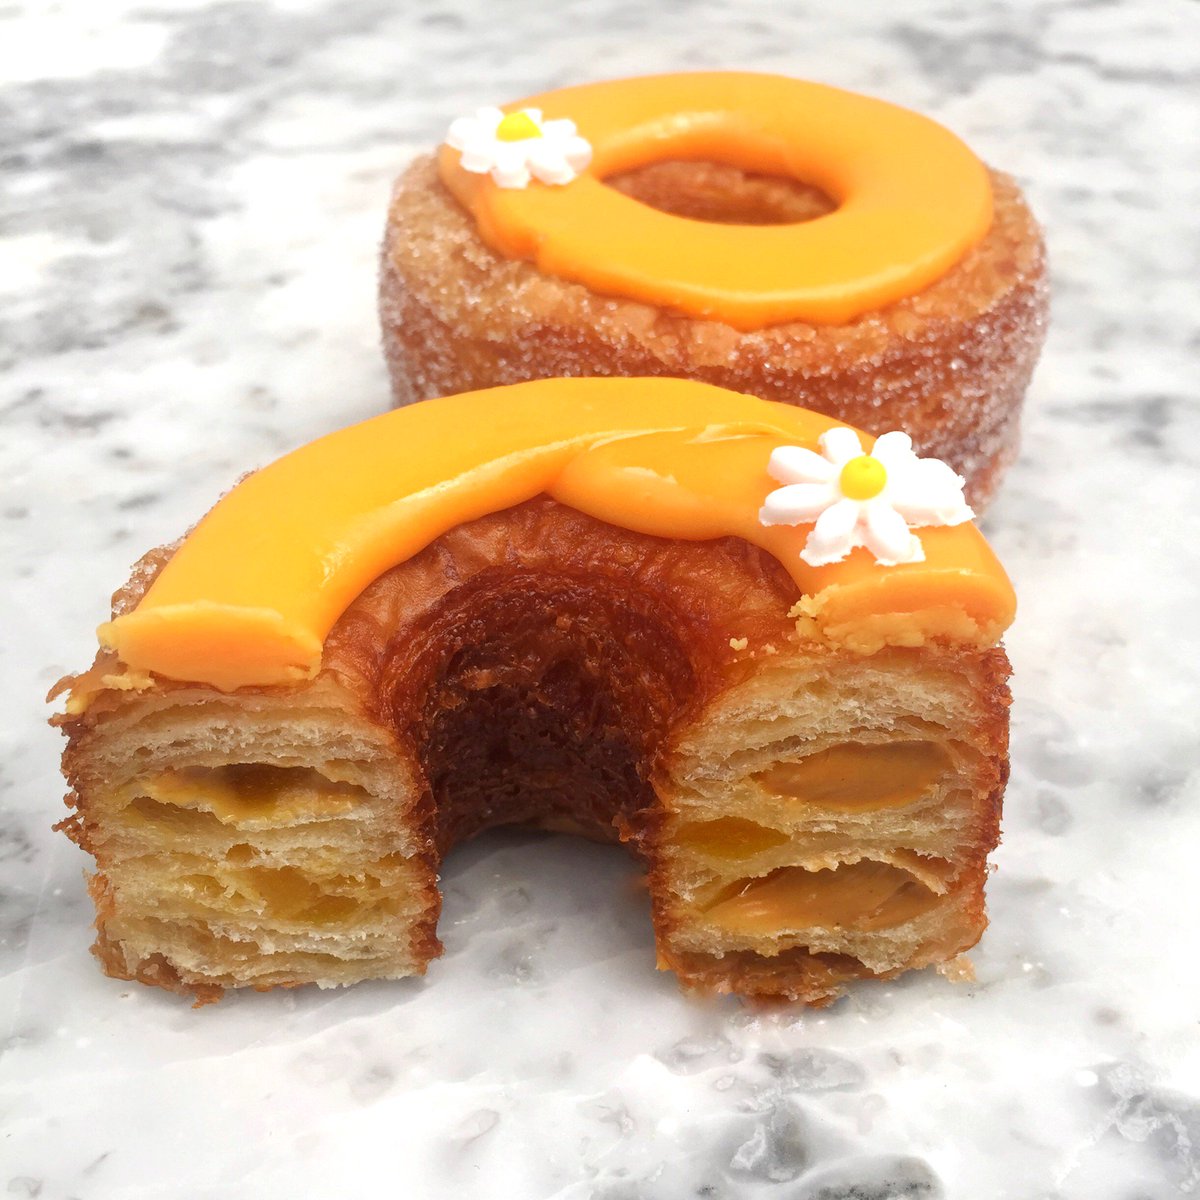 Have you tried May’s Apricot & Honey Chamomile Cronut® yet? It’s filled with apricot jam and creamy honey chamomile ganache, a perfect combination of fruity and floral flavors. Available during the whole month of May at Dominique Ansel Bakery London. #MayCronut #DABLondon